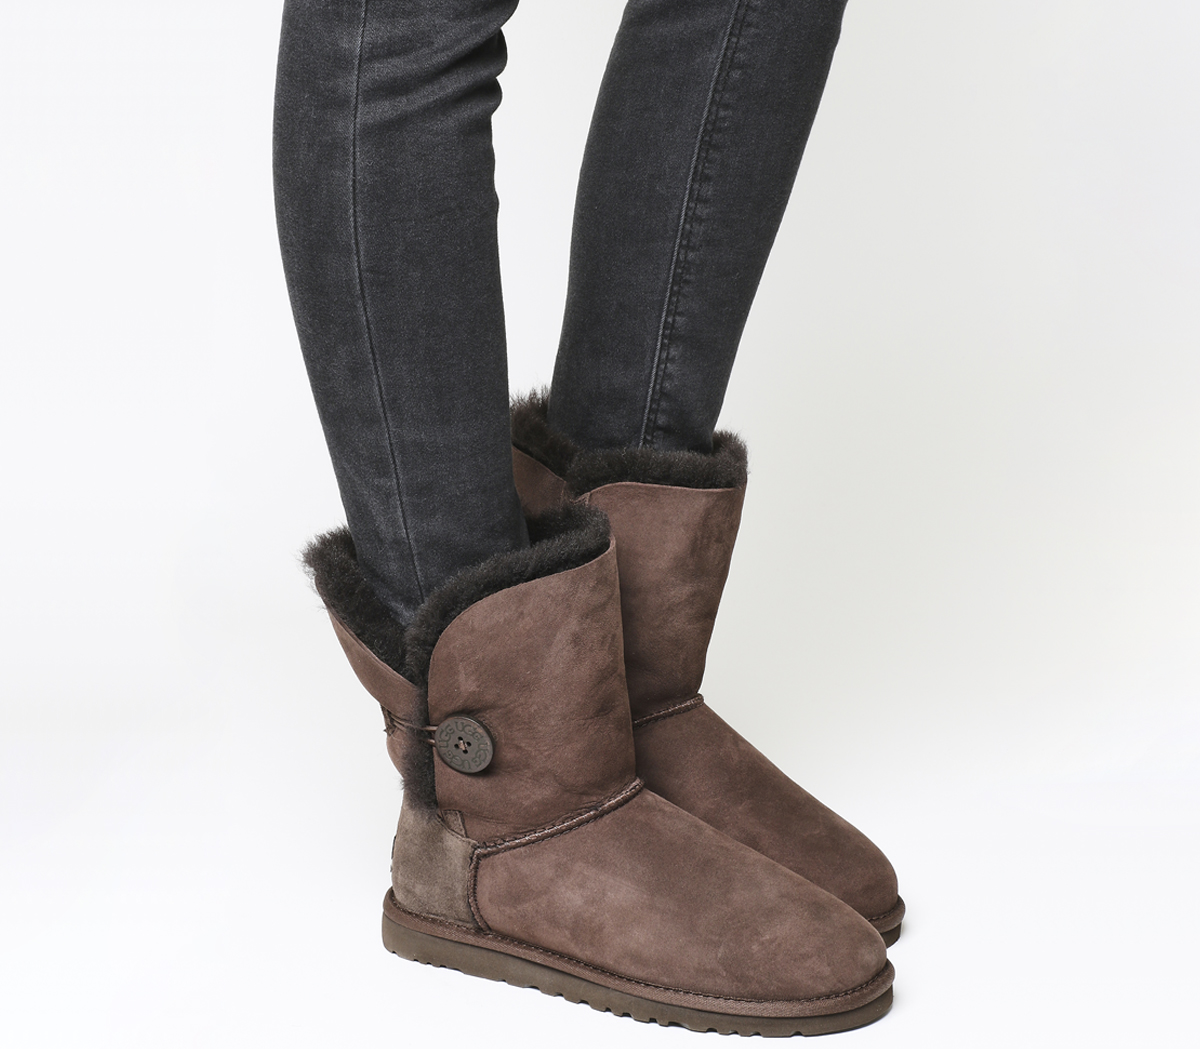 UGG Bailey Button Boots Chocolate Suede 